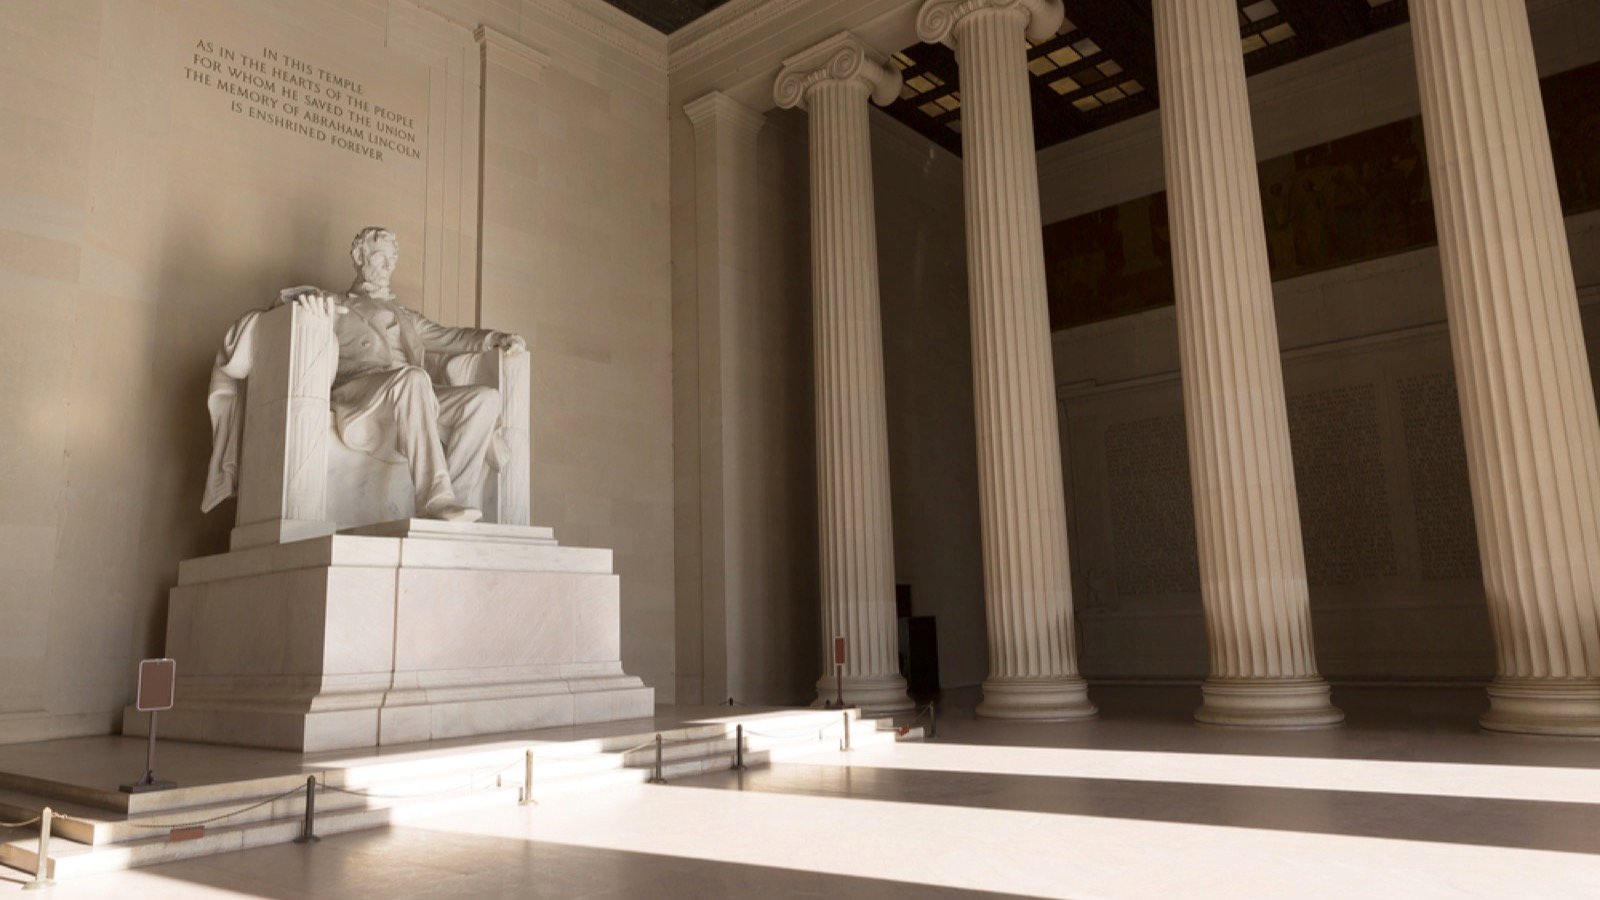 <p>The 19-foot-tall statue of Abraham Lincoln commemorates the 16th president of the United States, with Lincoln’s most famous speech inscribed. Thirty-six Doric columns surround the monument, one for each state at the time of Lincoln’s death. Plus, it’s free to visit this infamous monument.</p>